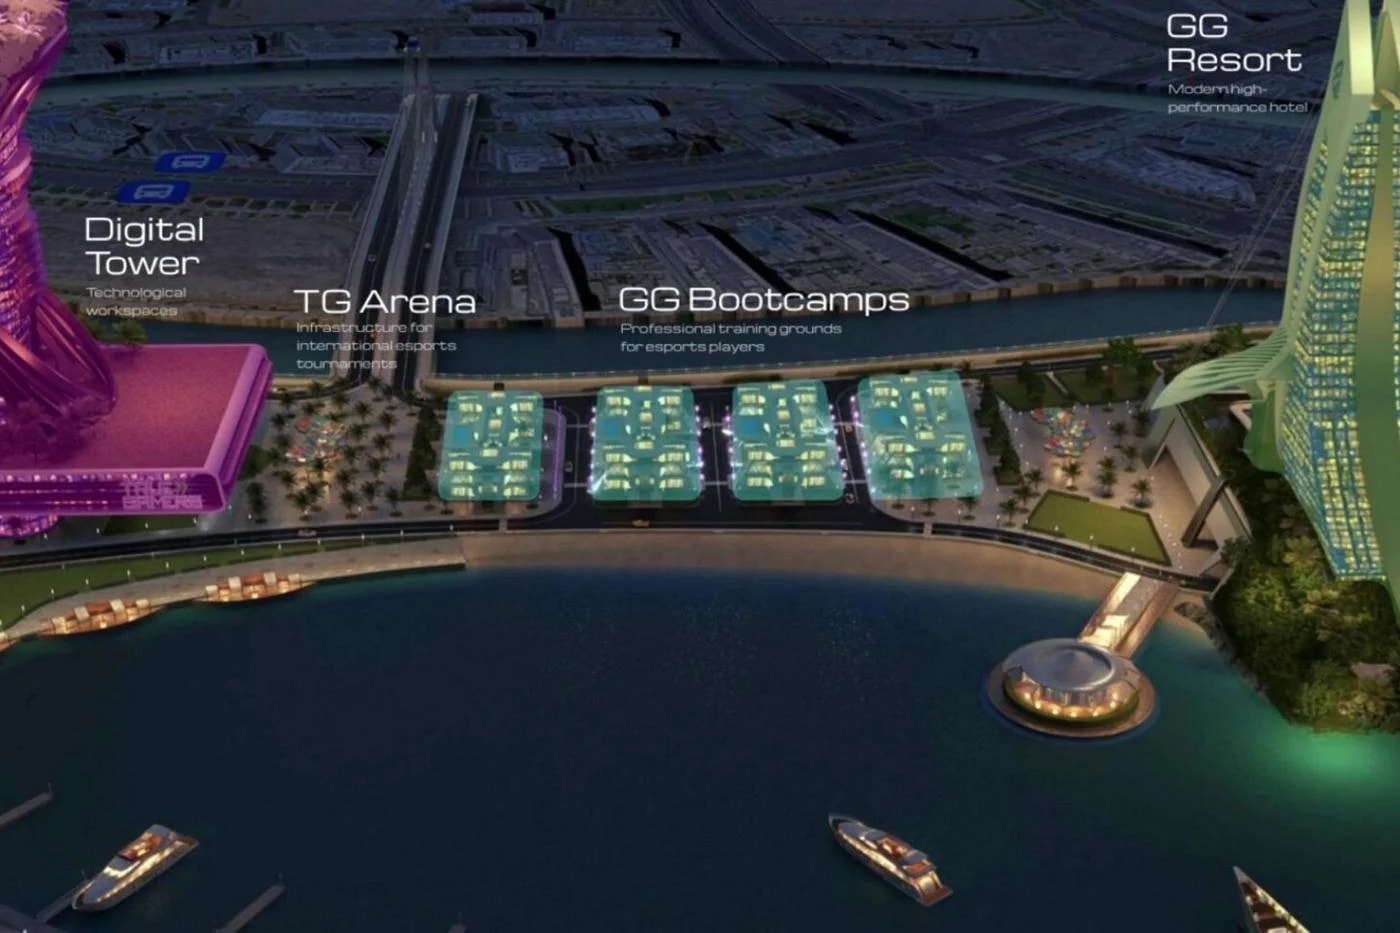 Abu Dhabi To Build World's First eSports Island Costing $280 Million USD hotel high-tech venues gaming tournaments middle east arabia training facilities content creation spaces gaming 